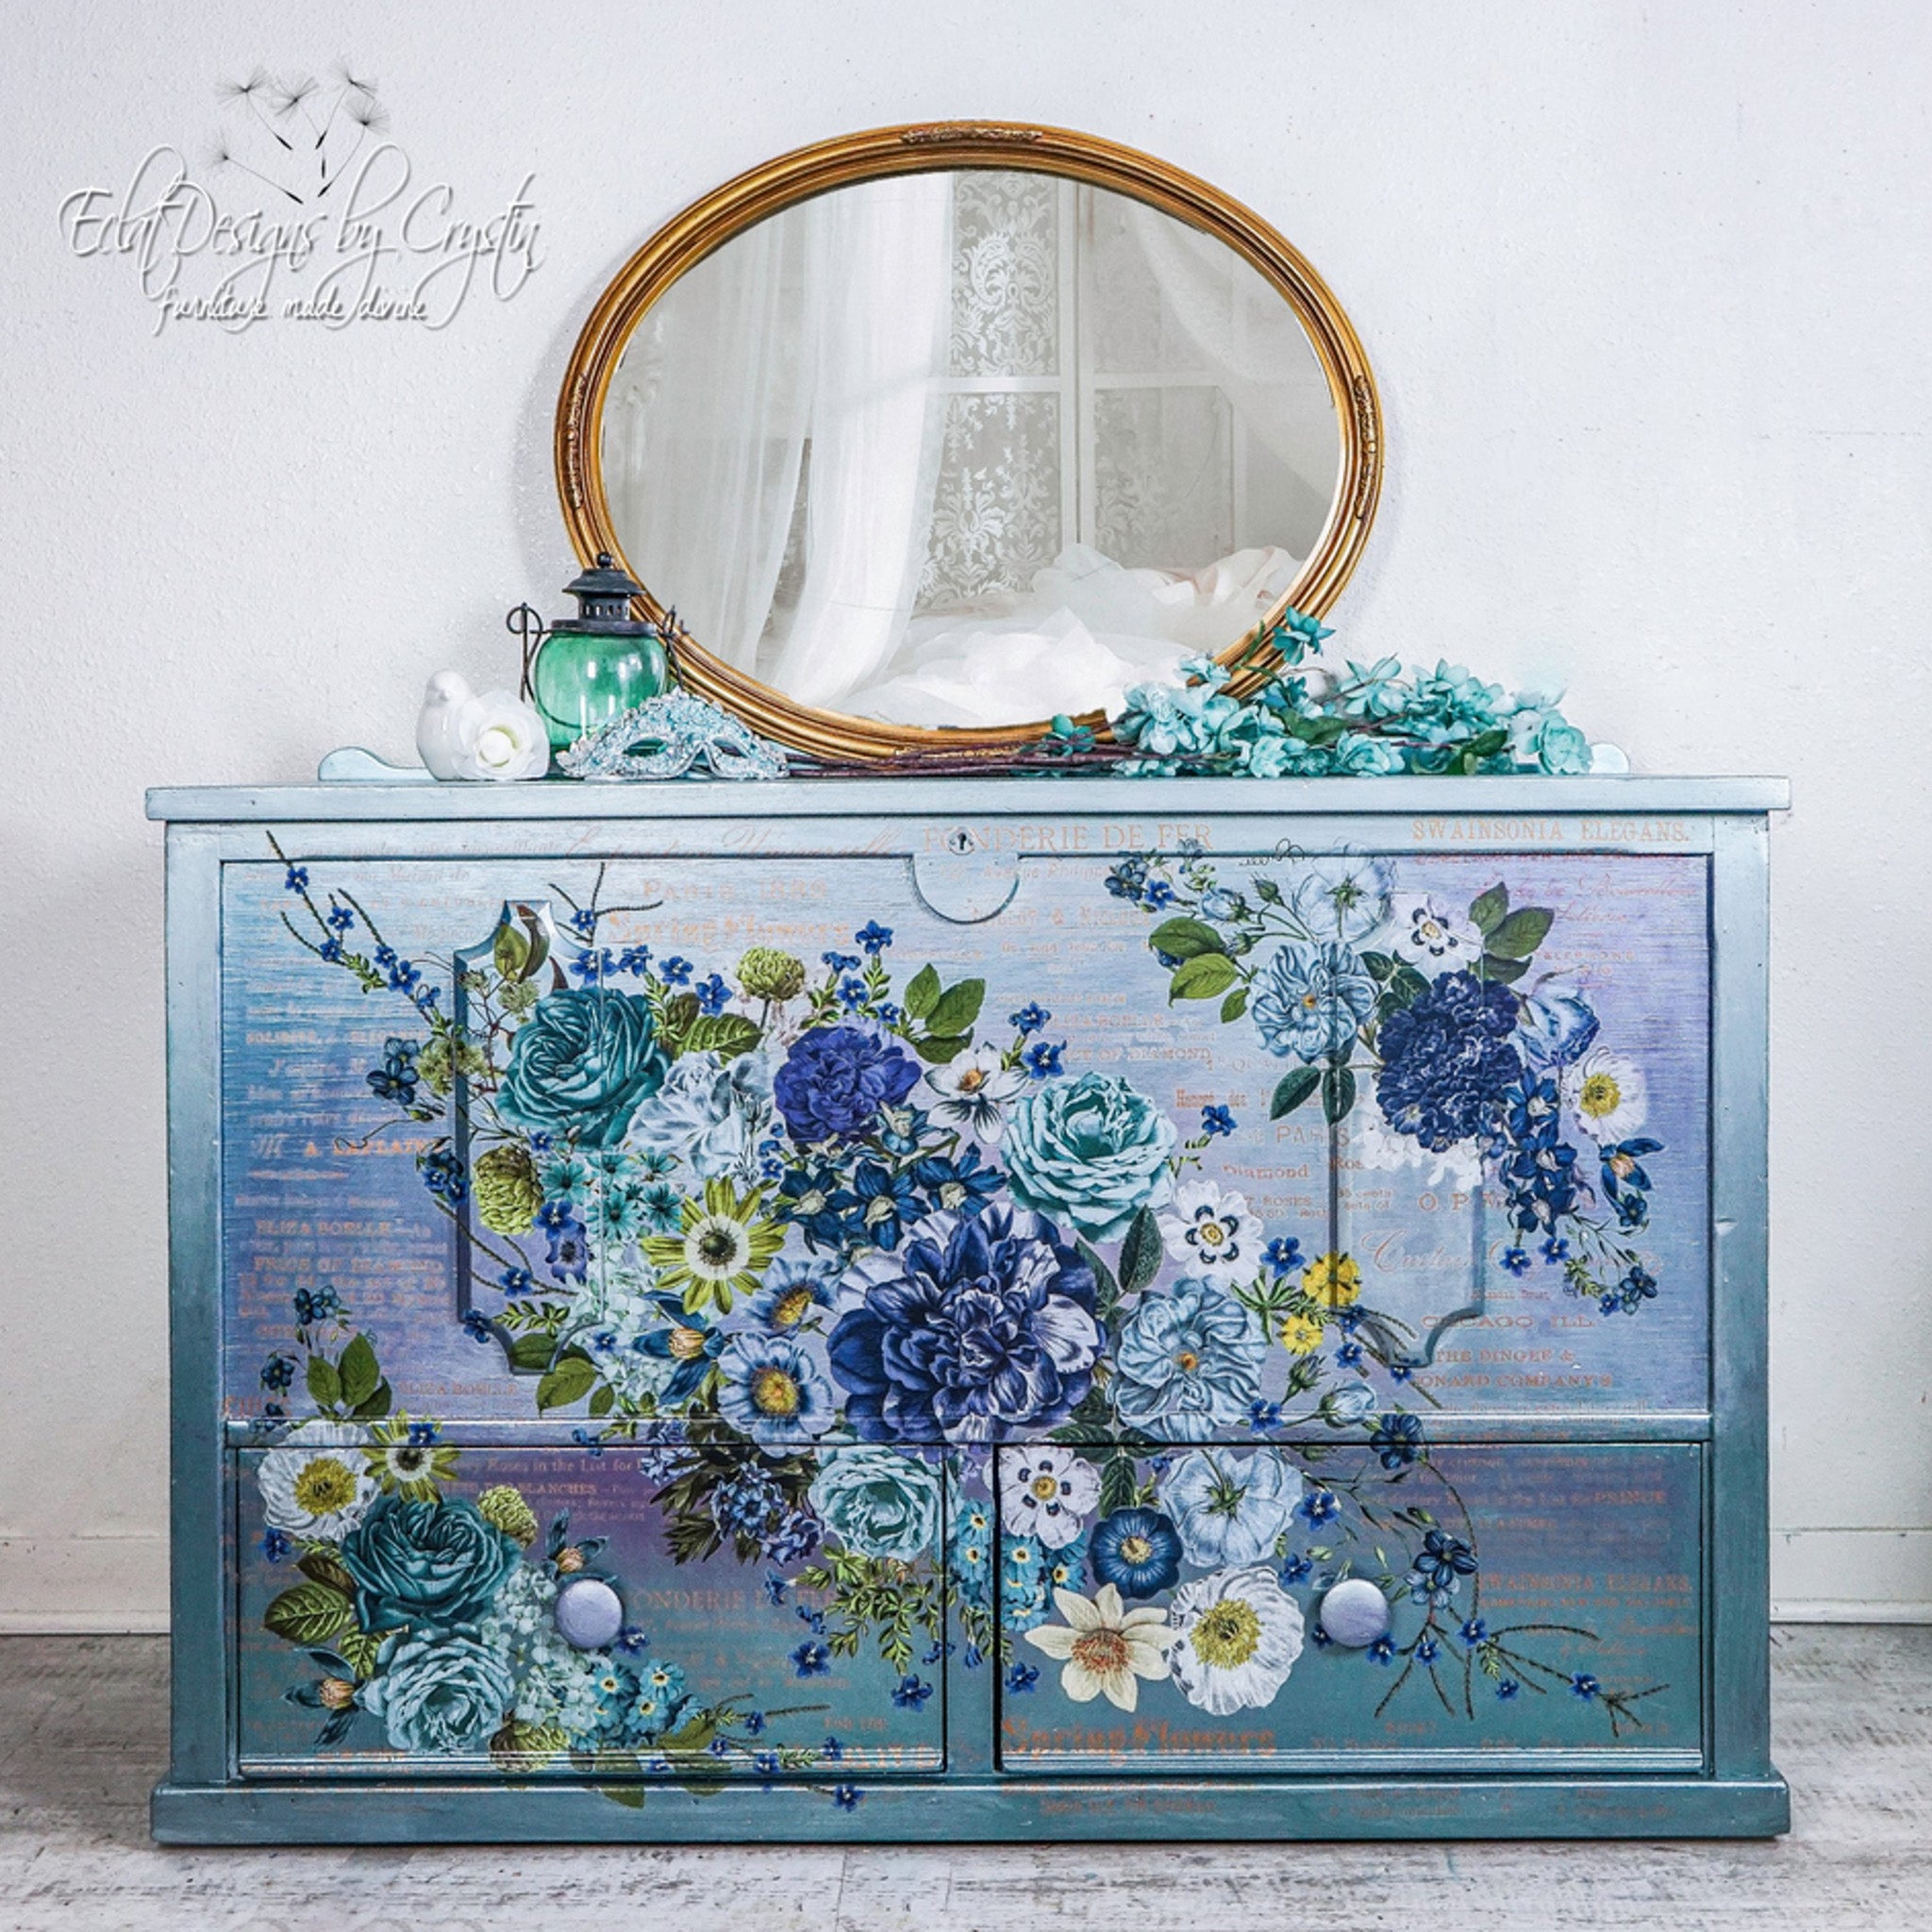 A vintage dresser refurbished by Eclat Designs by Crystin is painted a blend of blues and features the Cosmic Roses transfer on its drawers.